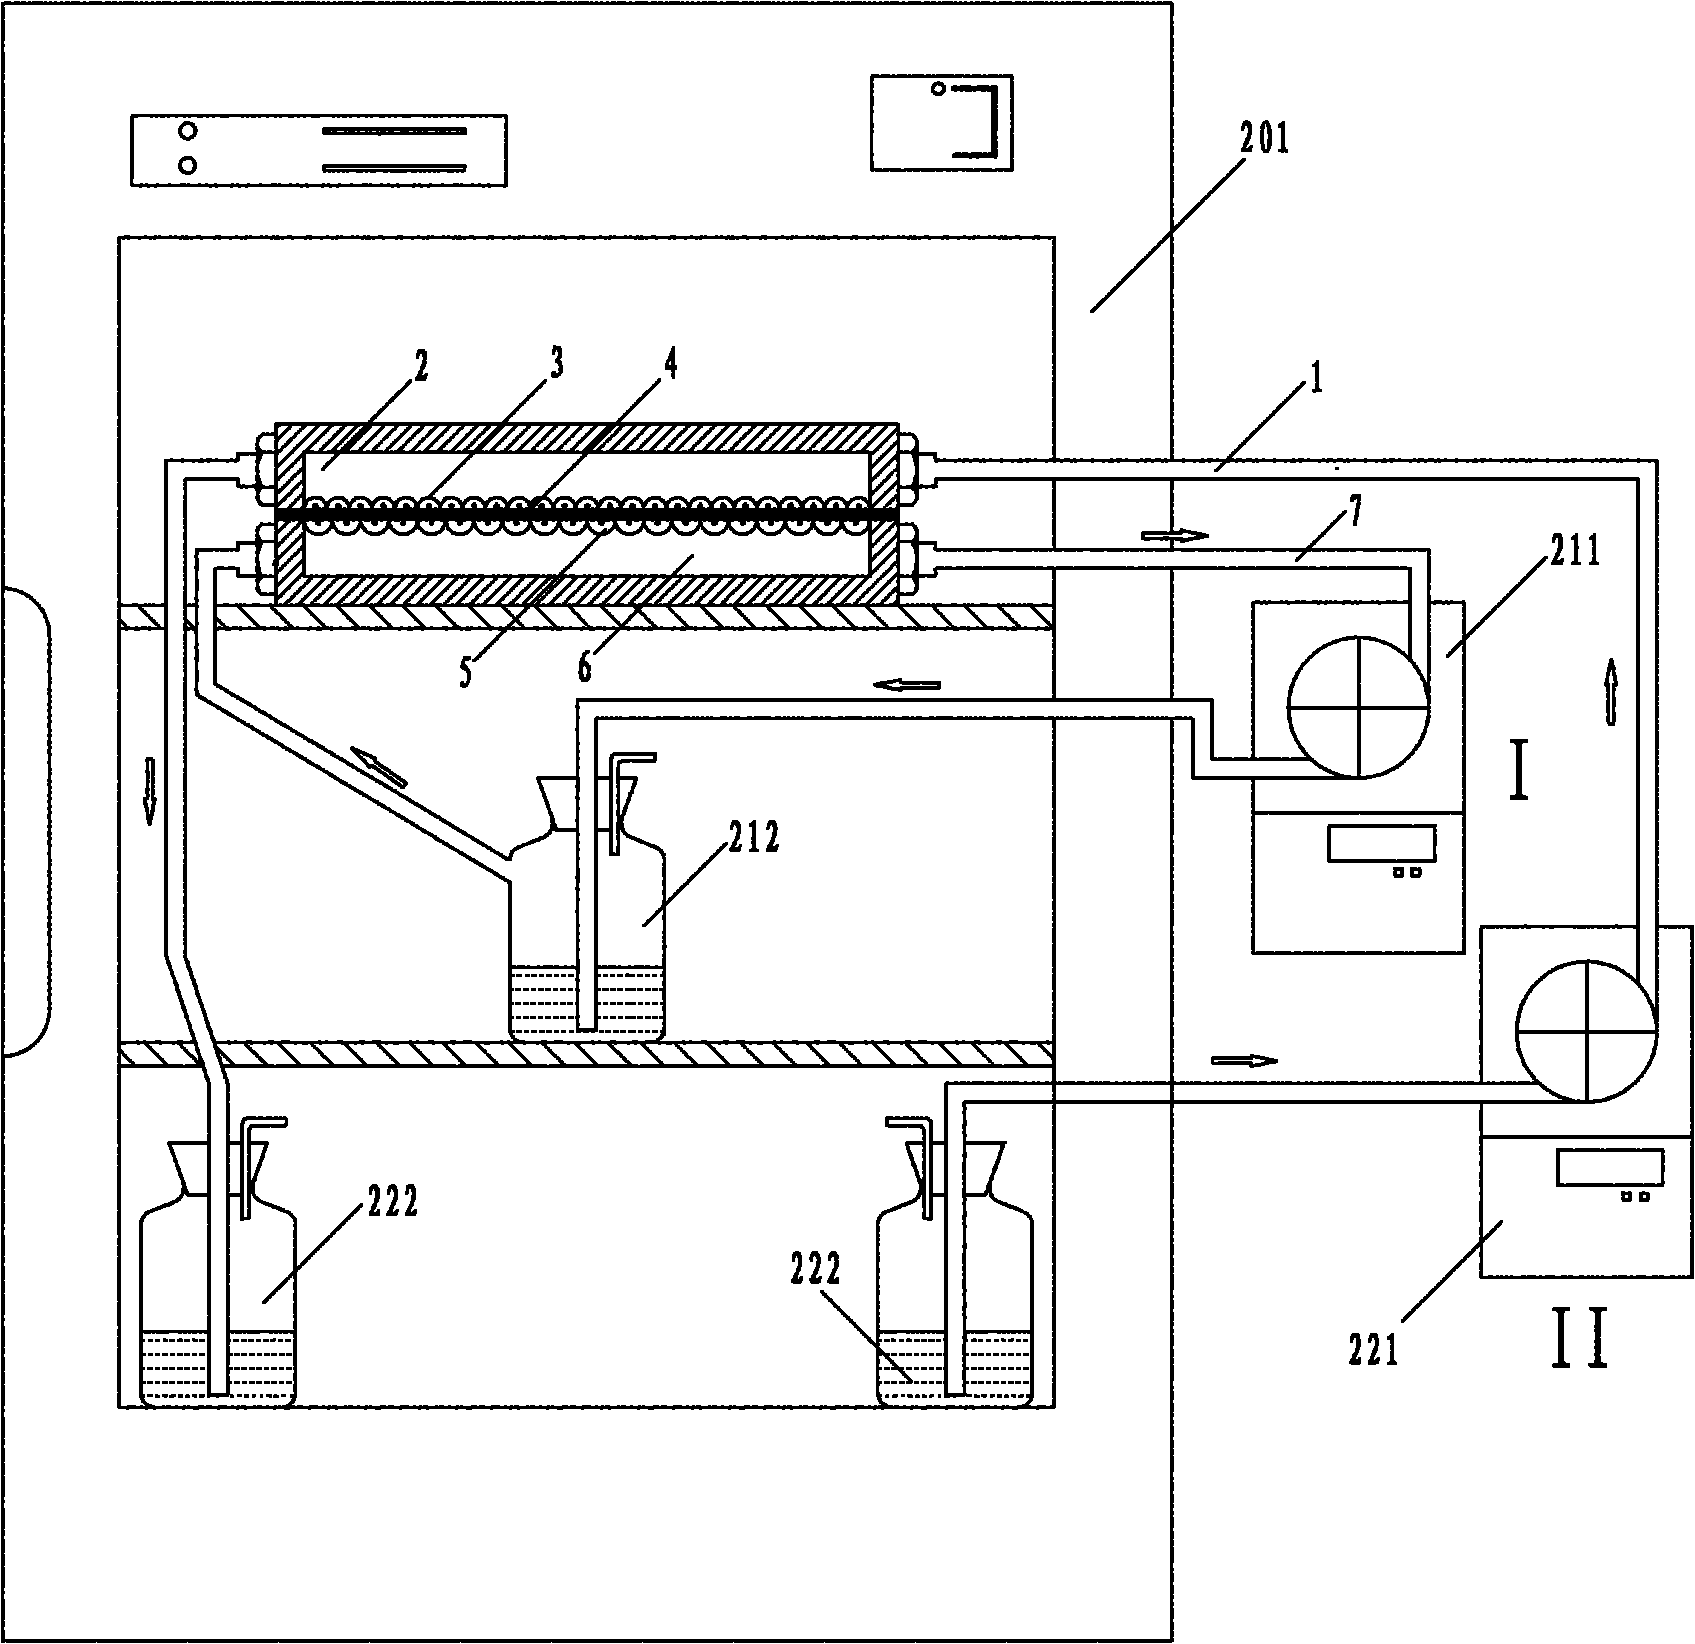 Mechanical loading flow chamber device for co-culturing in-vitro cells